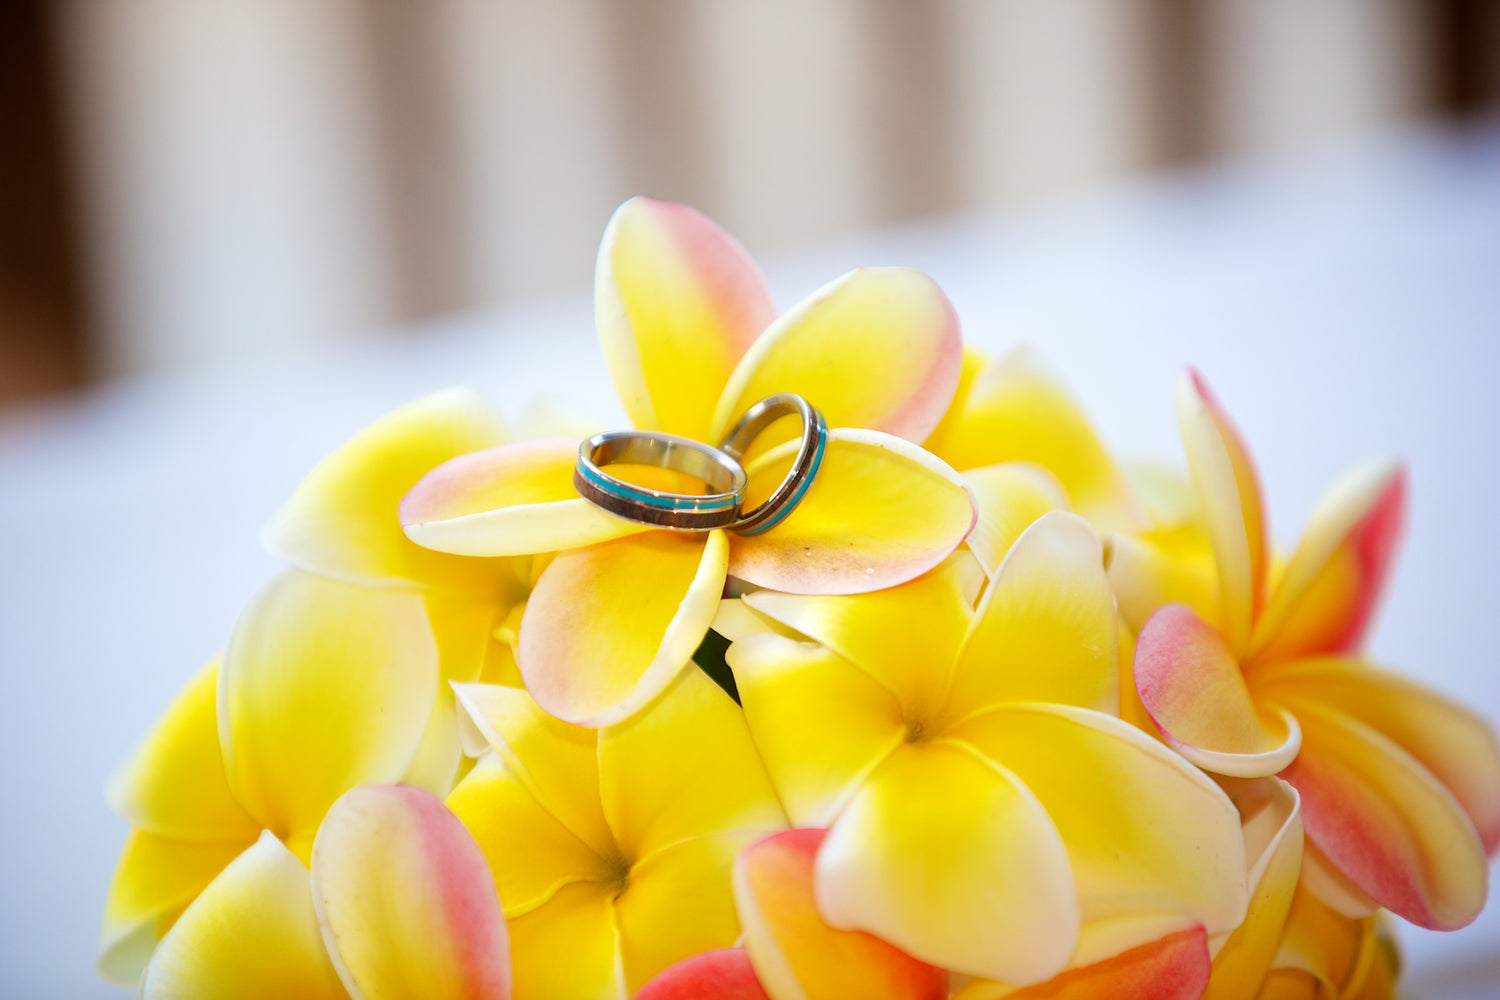 Caring for Your Wedding Ring Based on Its Material